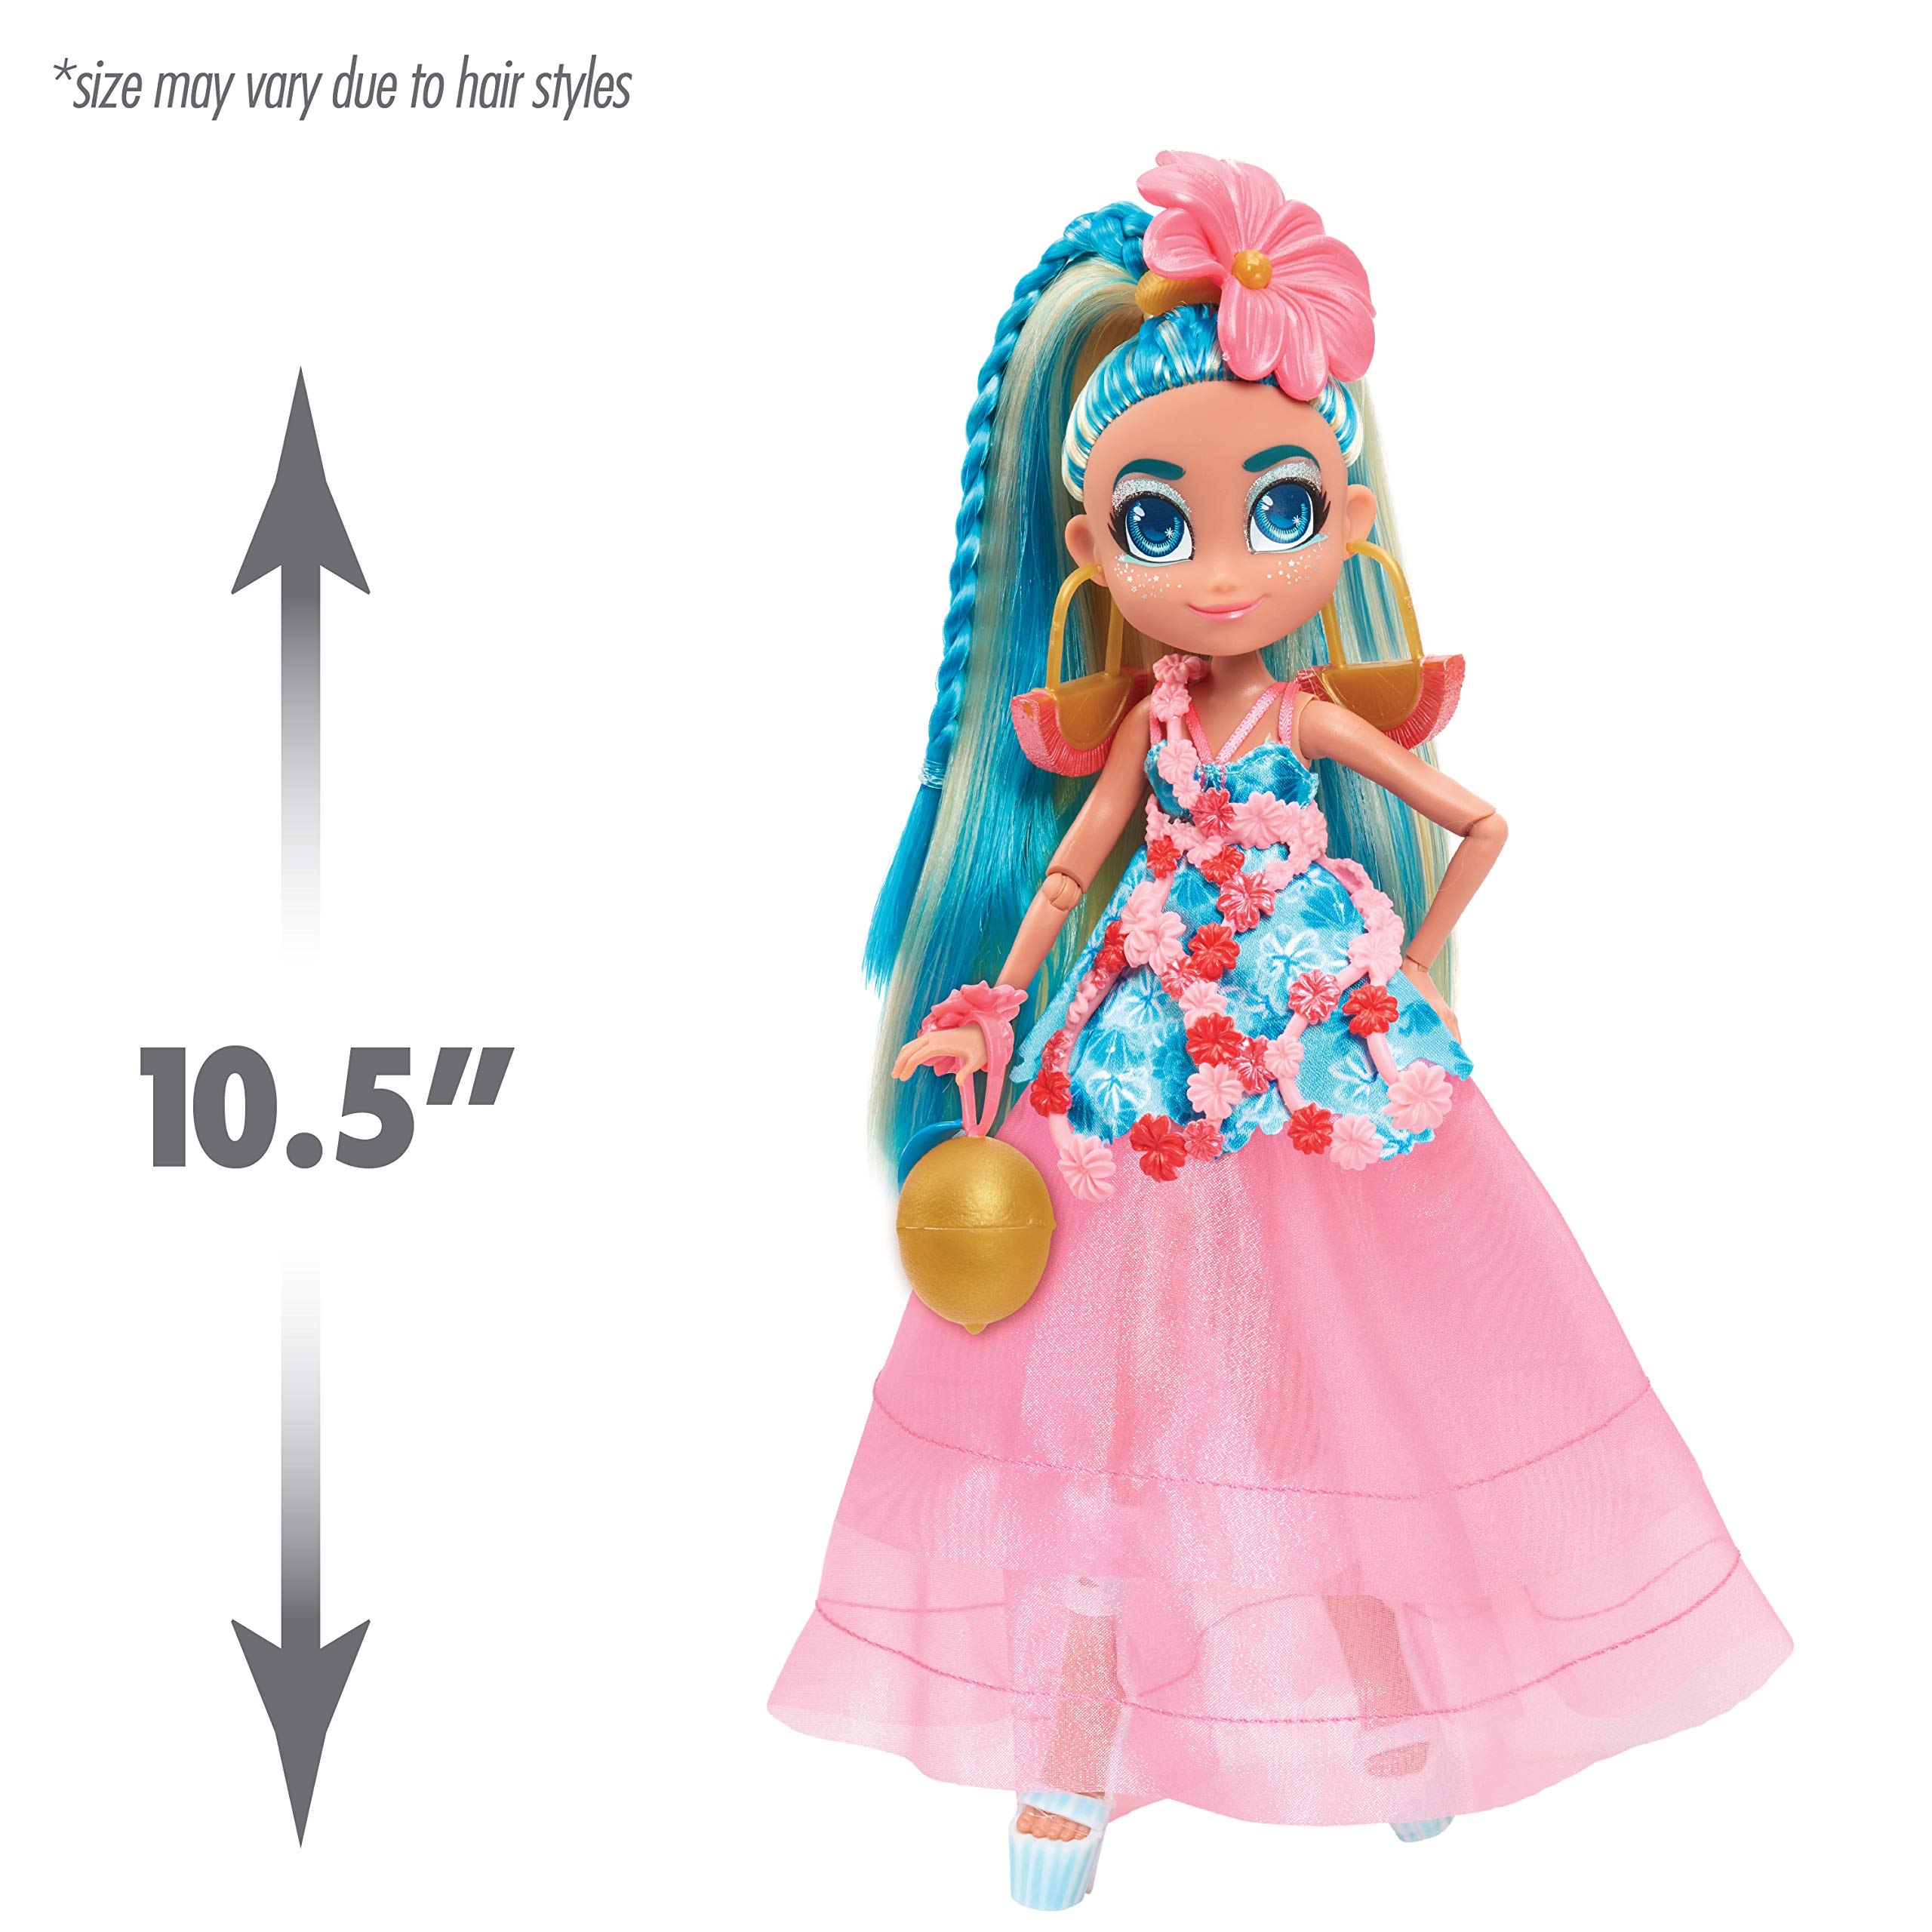 Hairdorables Hairmazing Prom Perfect Fashion Dolls, Noah, Blue and Blonde Hair, Kids Toys for Ages 3 Up, Gifts and Presents by Just Play